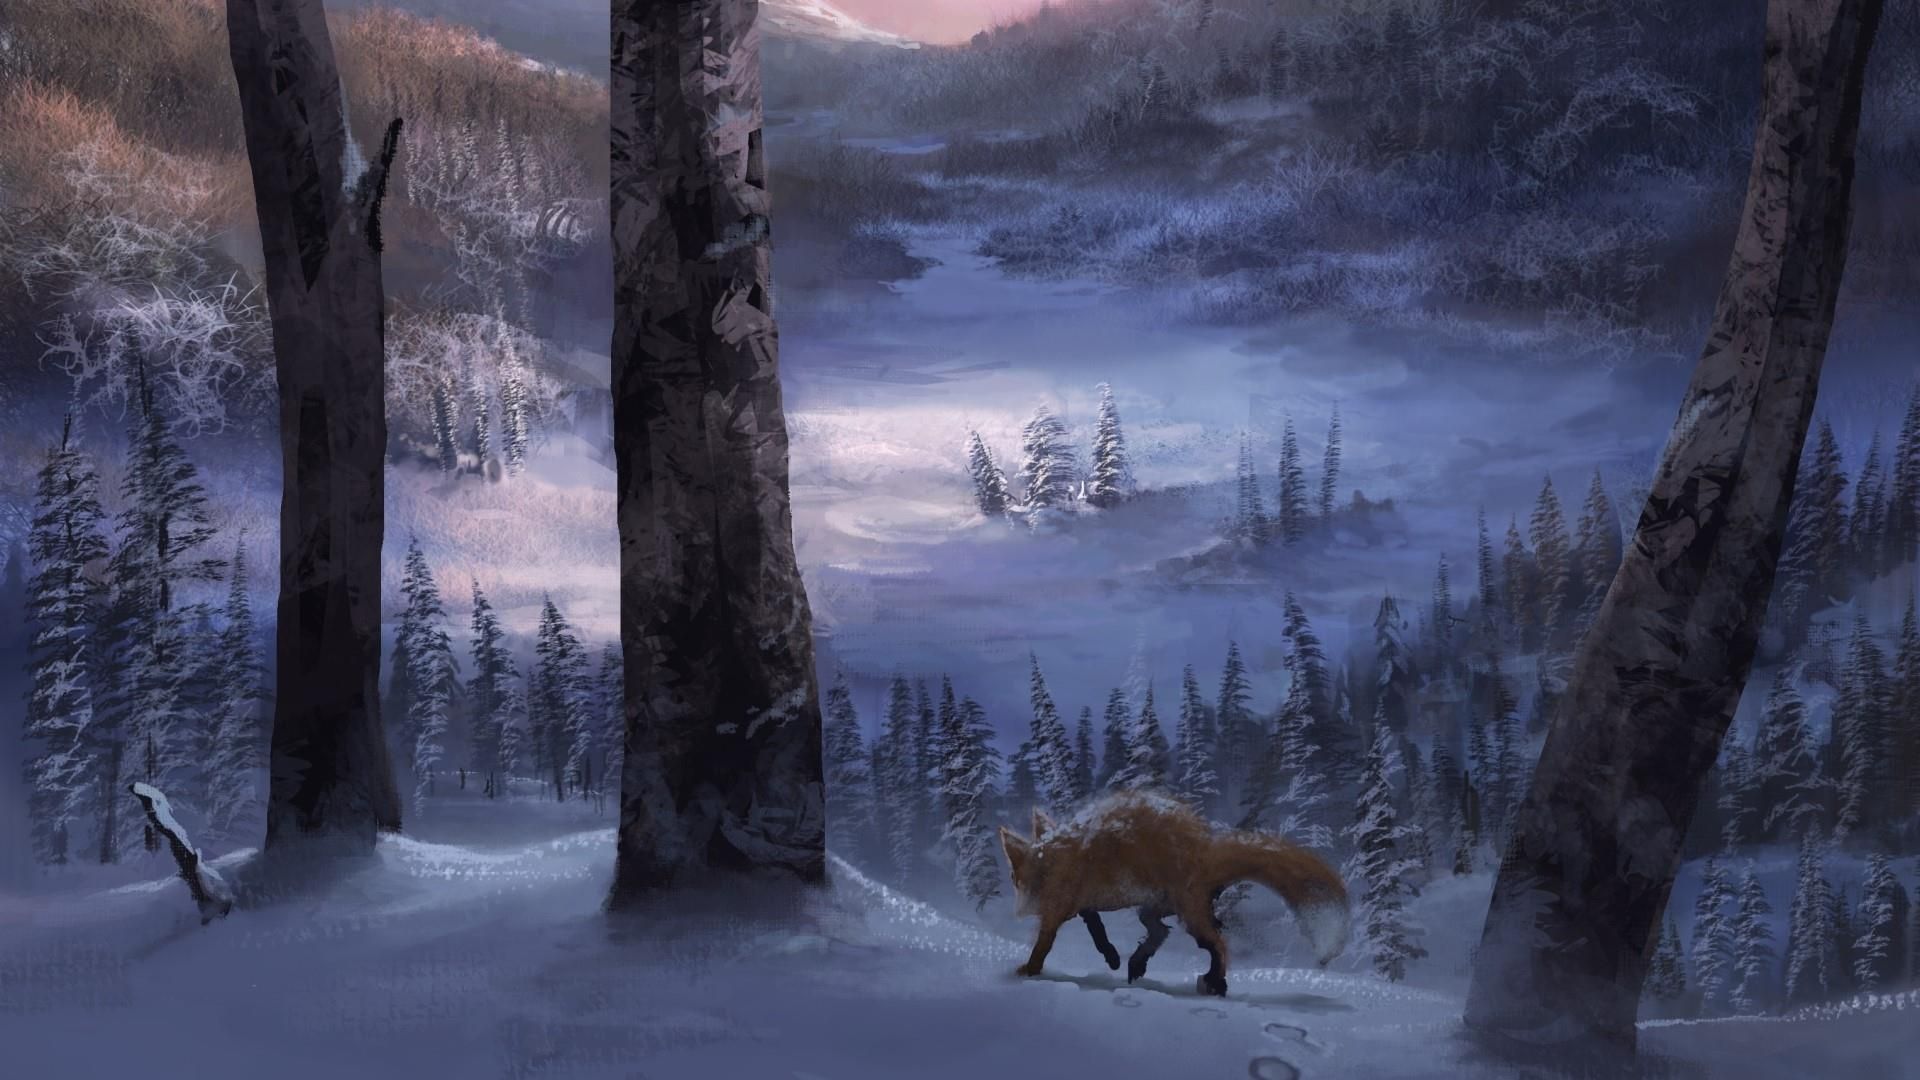 Lone Fox In The Winter Forest ️ HD Wallpaper. Wallpaper. Fantasy landscape, Winter forest, Fox image